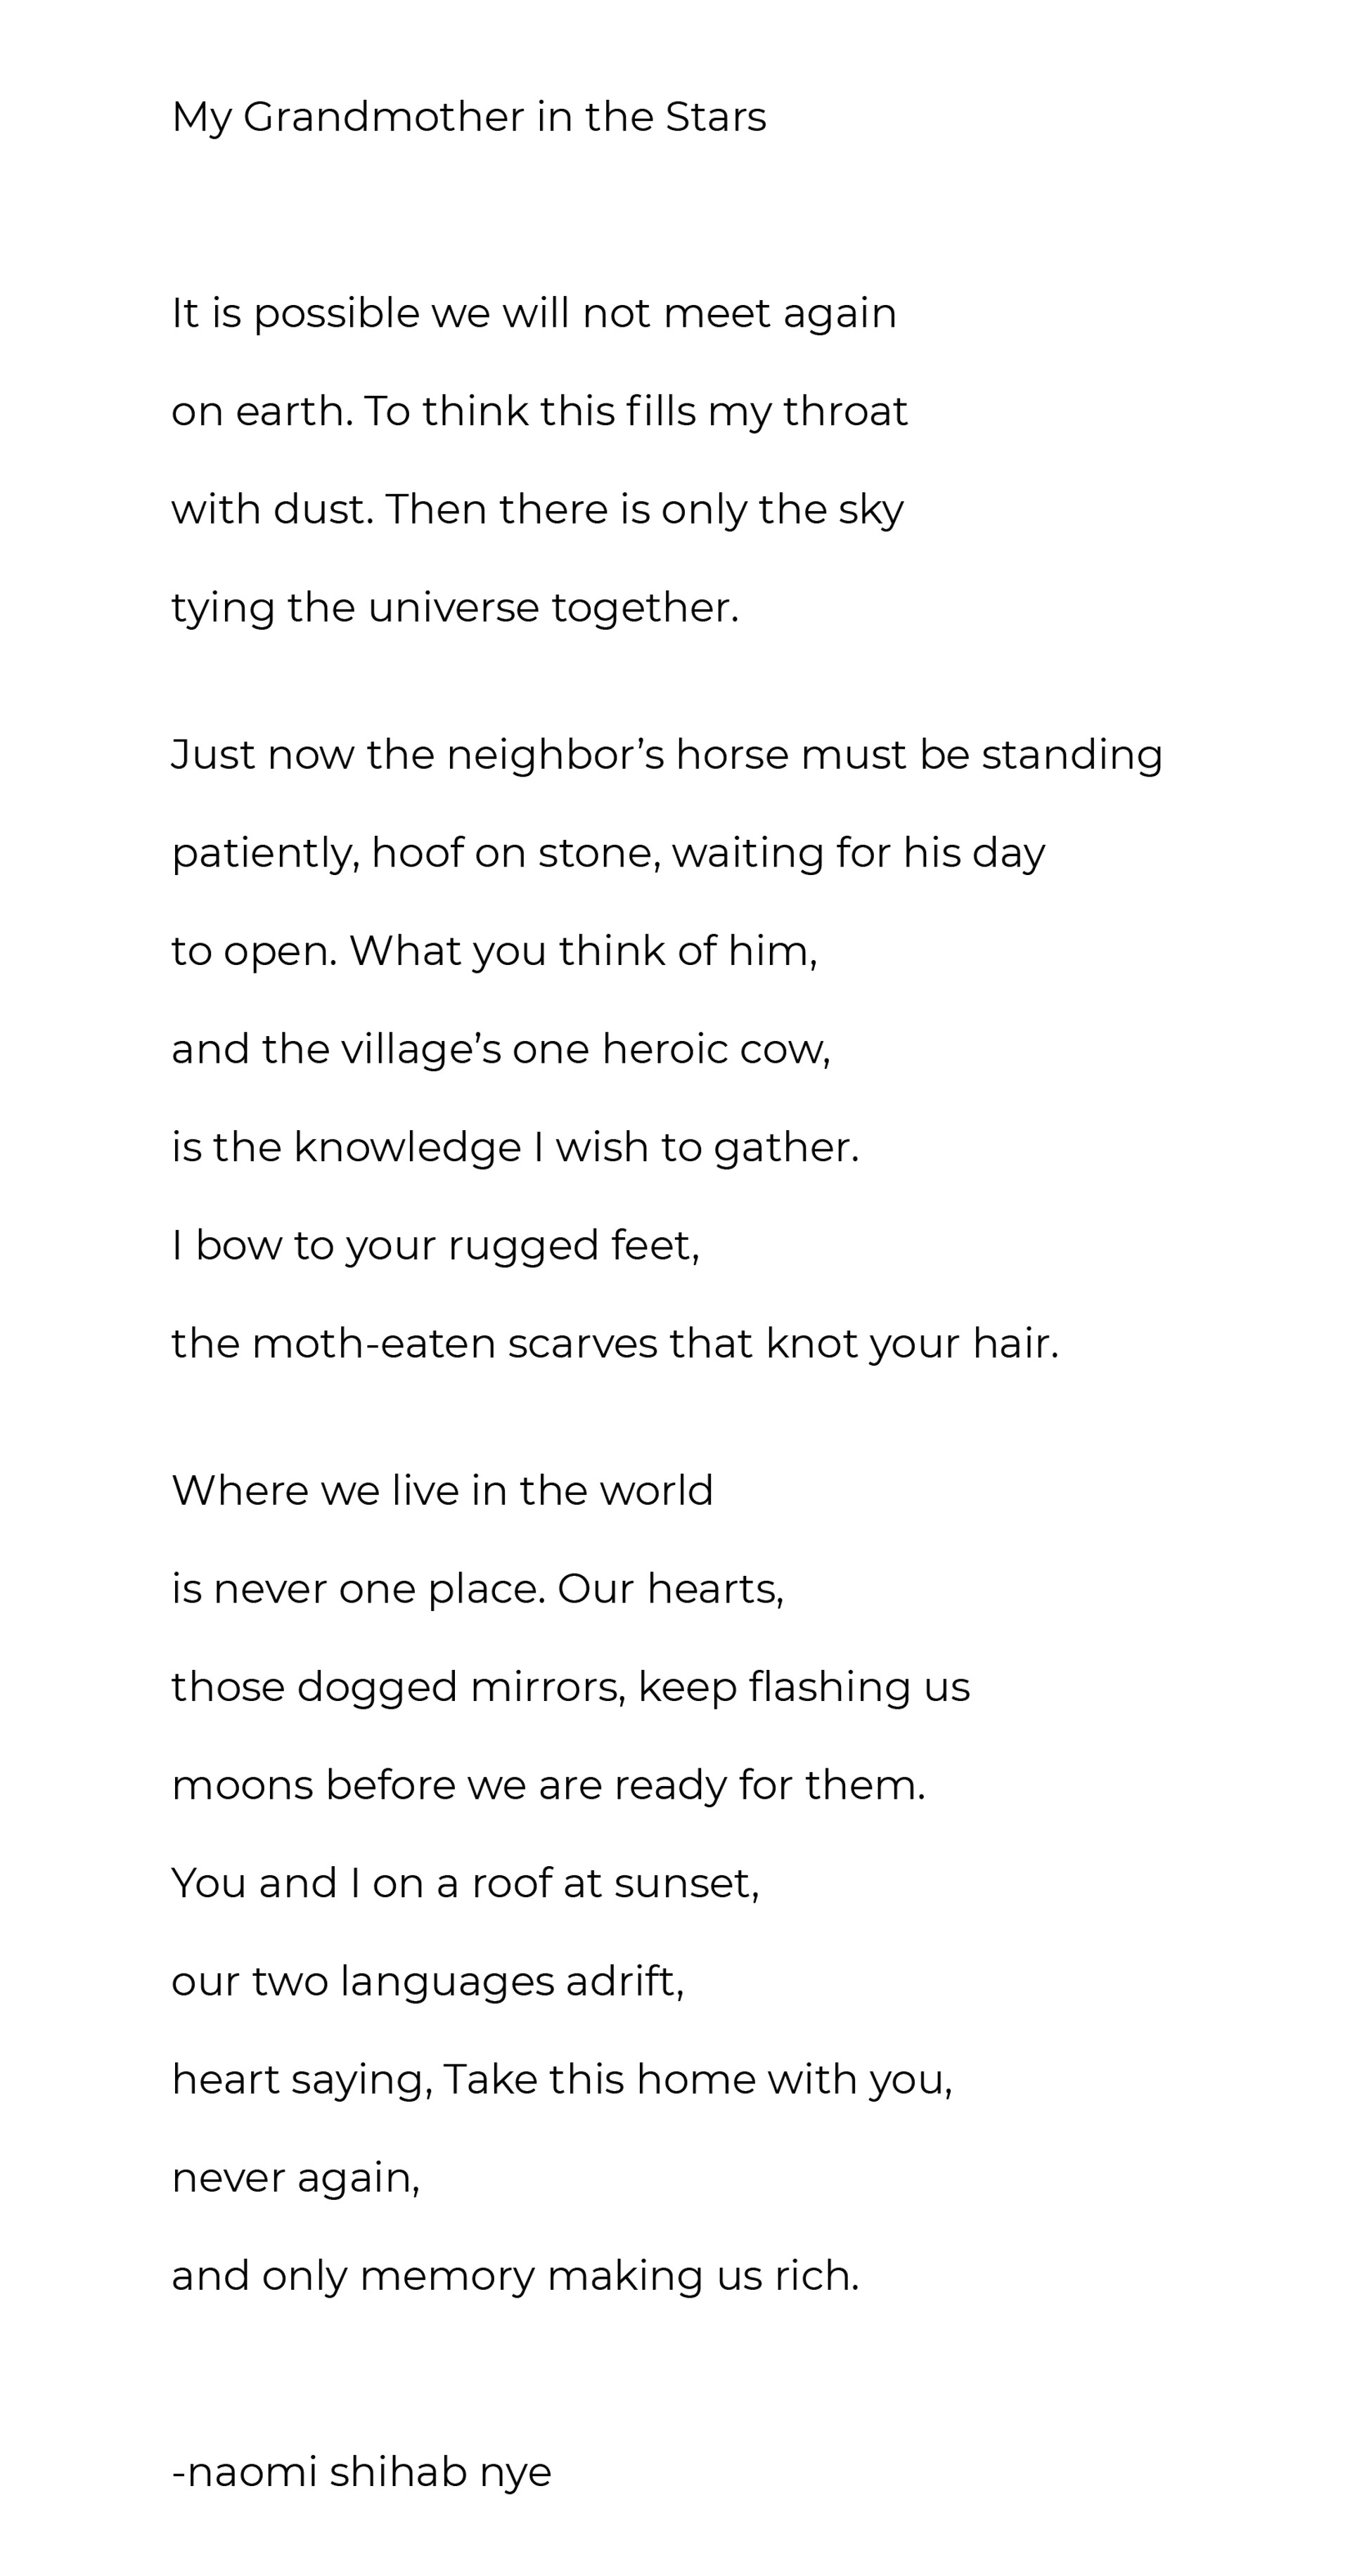 My Grandmother in the Stars by Naomi Shihab Nye